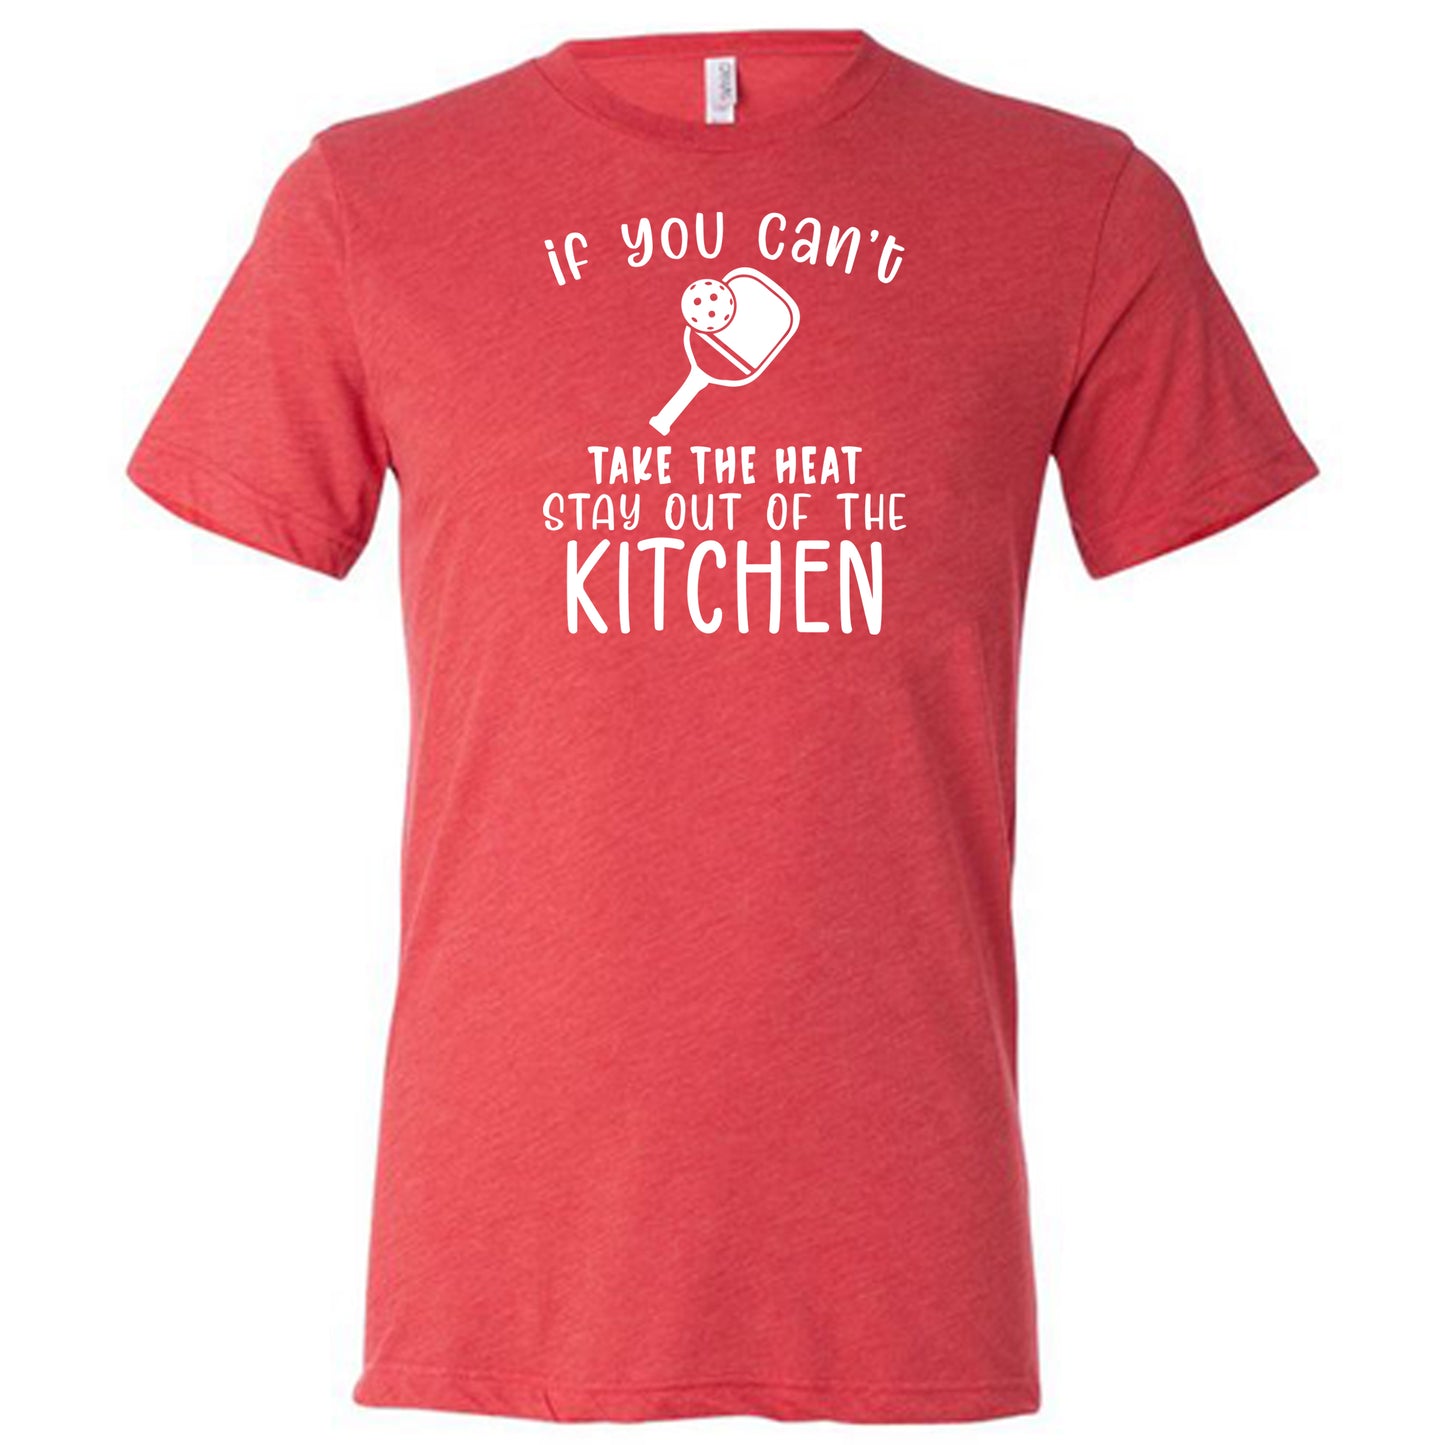 If You Can't Take The Heat Stay Out Of The Kitchen Shirt Unisex